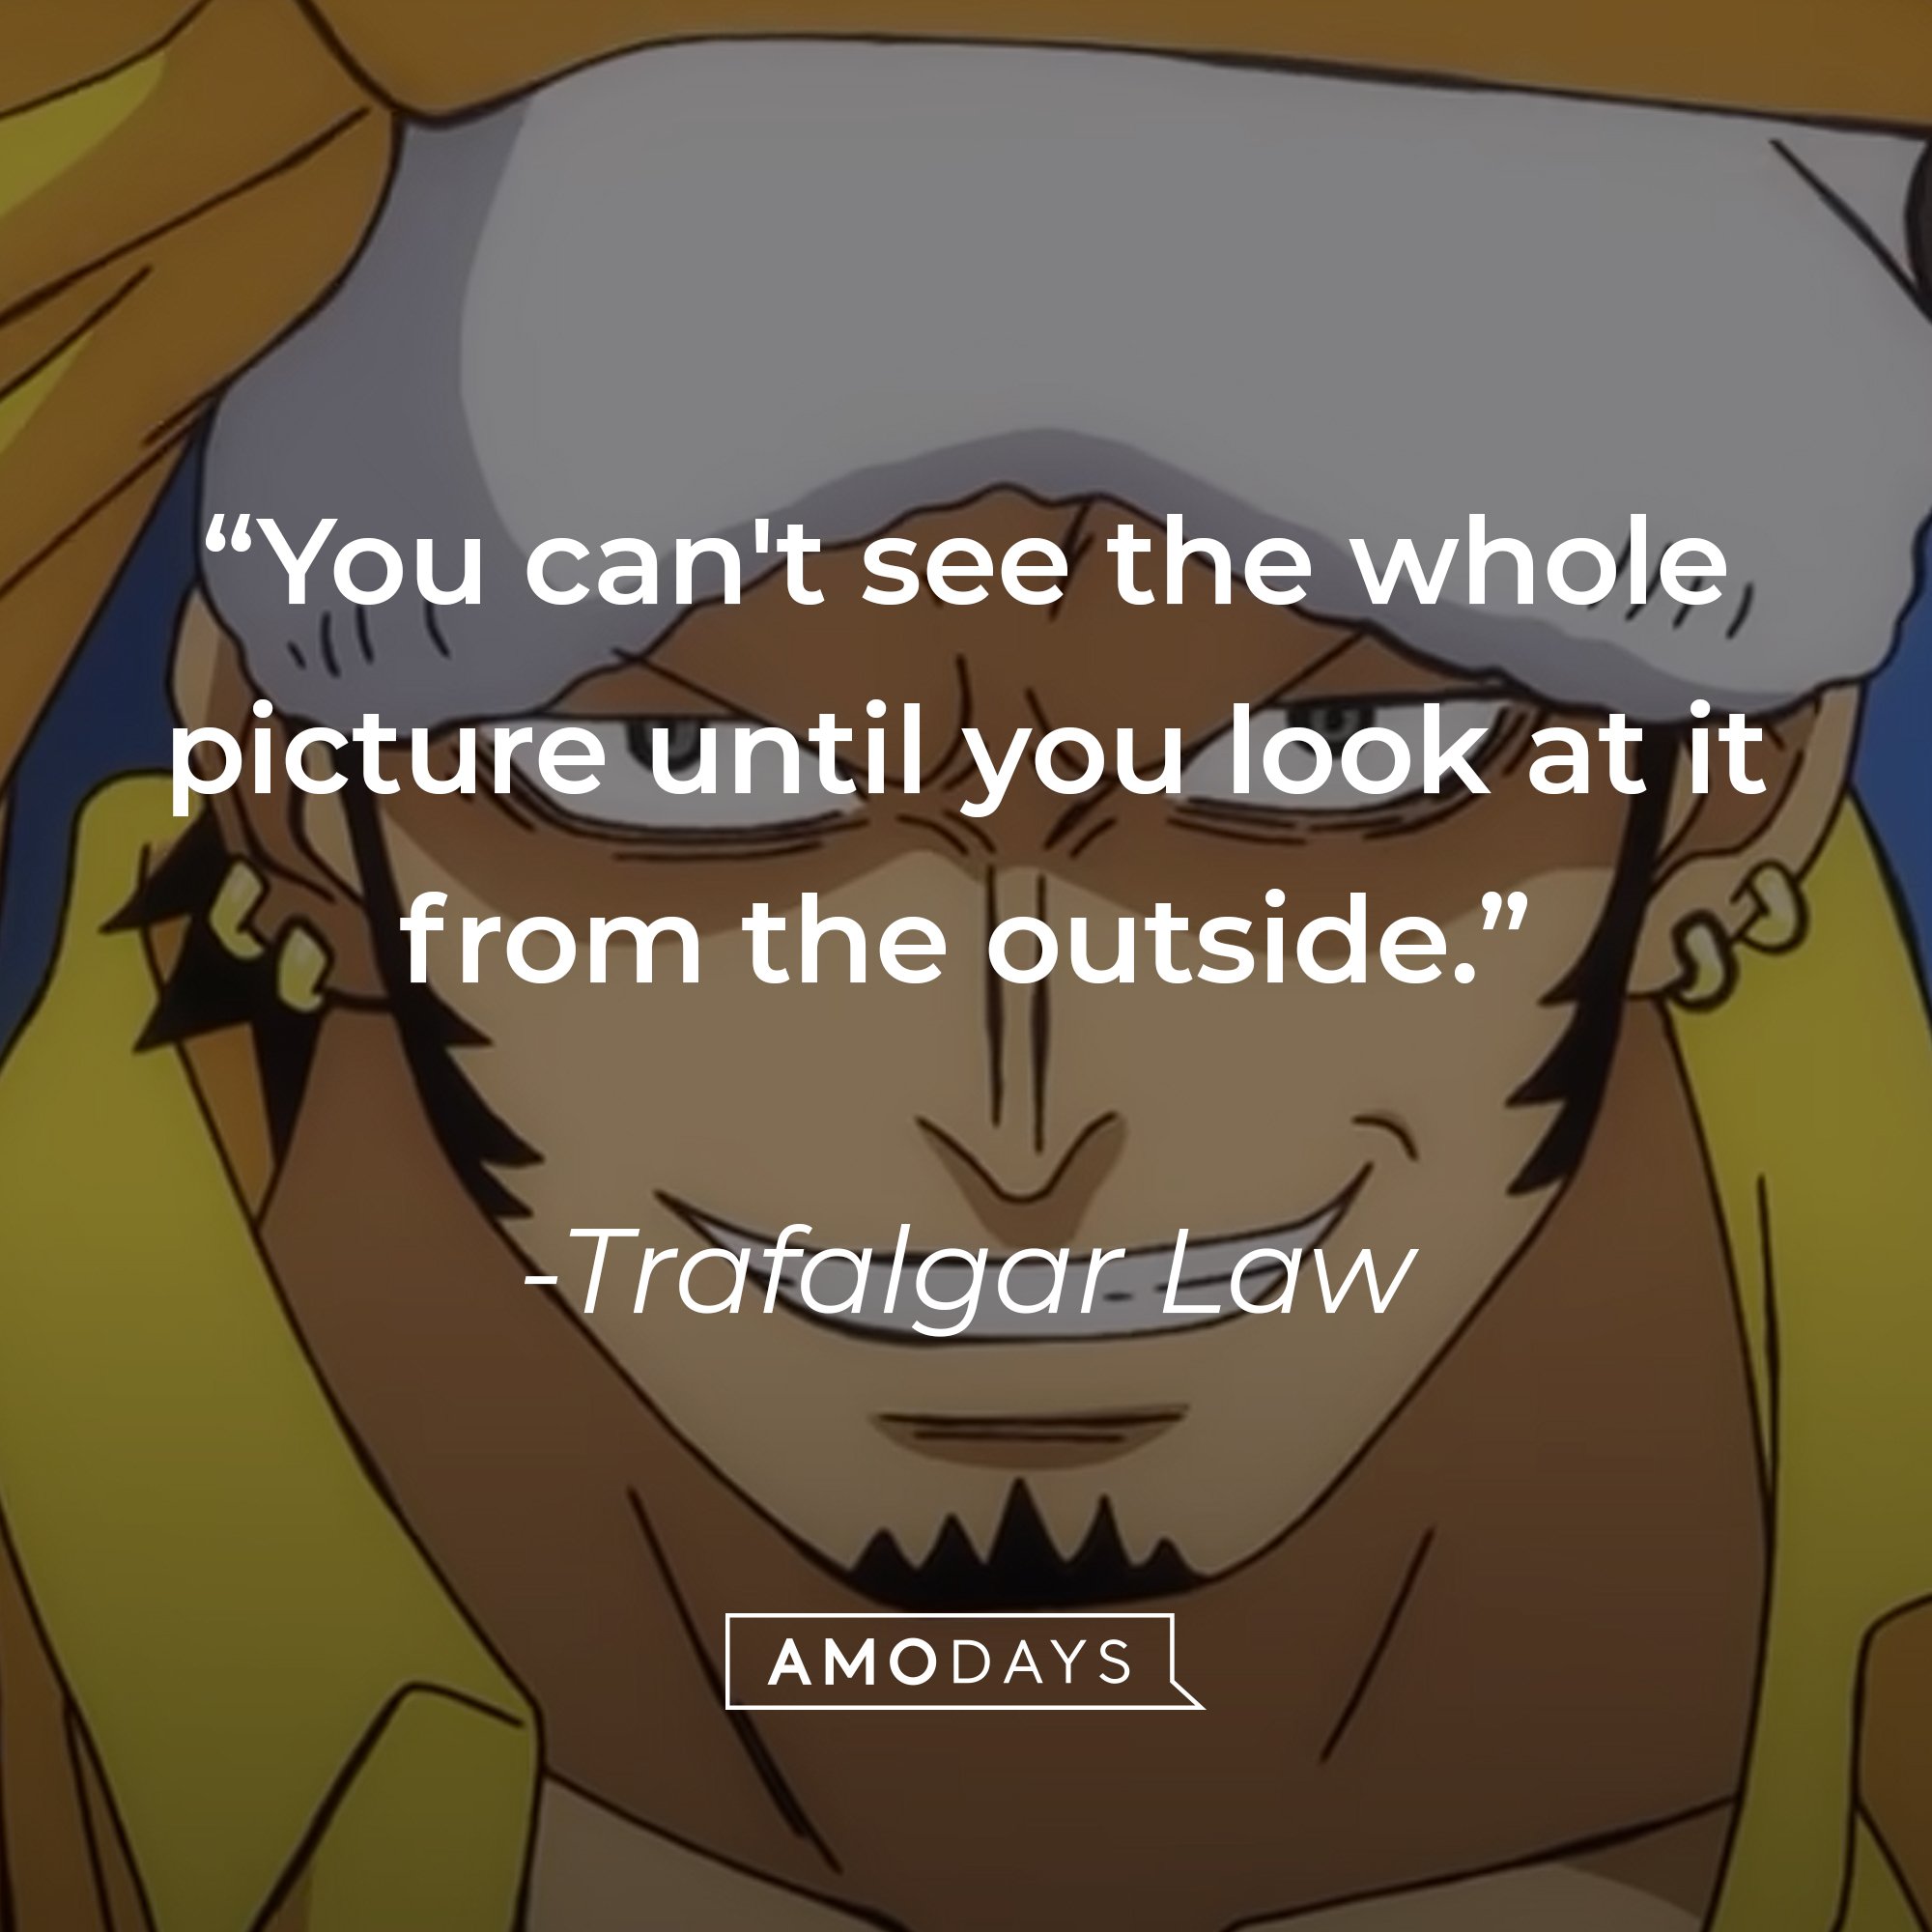 Trafalgar Law’s quote: "You can't see the whole picture until you look at it from the outside." | Image: AmoDays